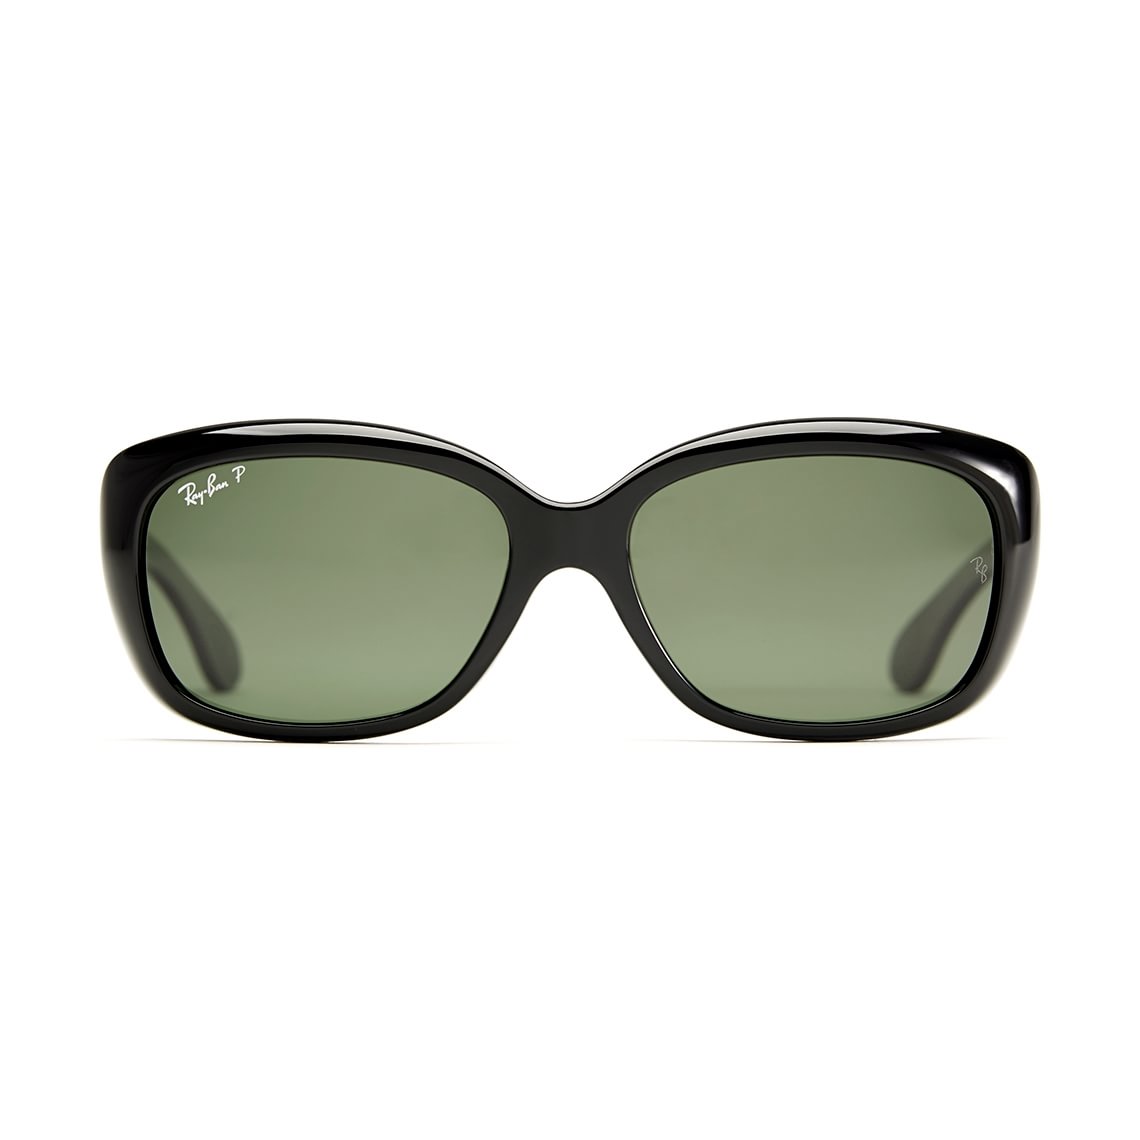 Ray-Ban Jackie Ohh RB4101 601/58 58